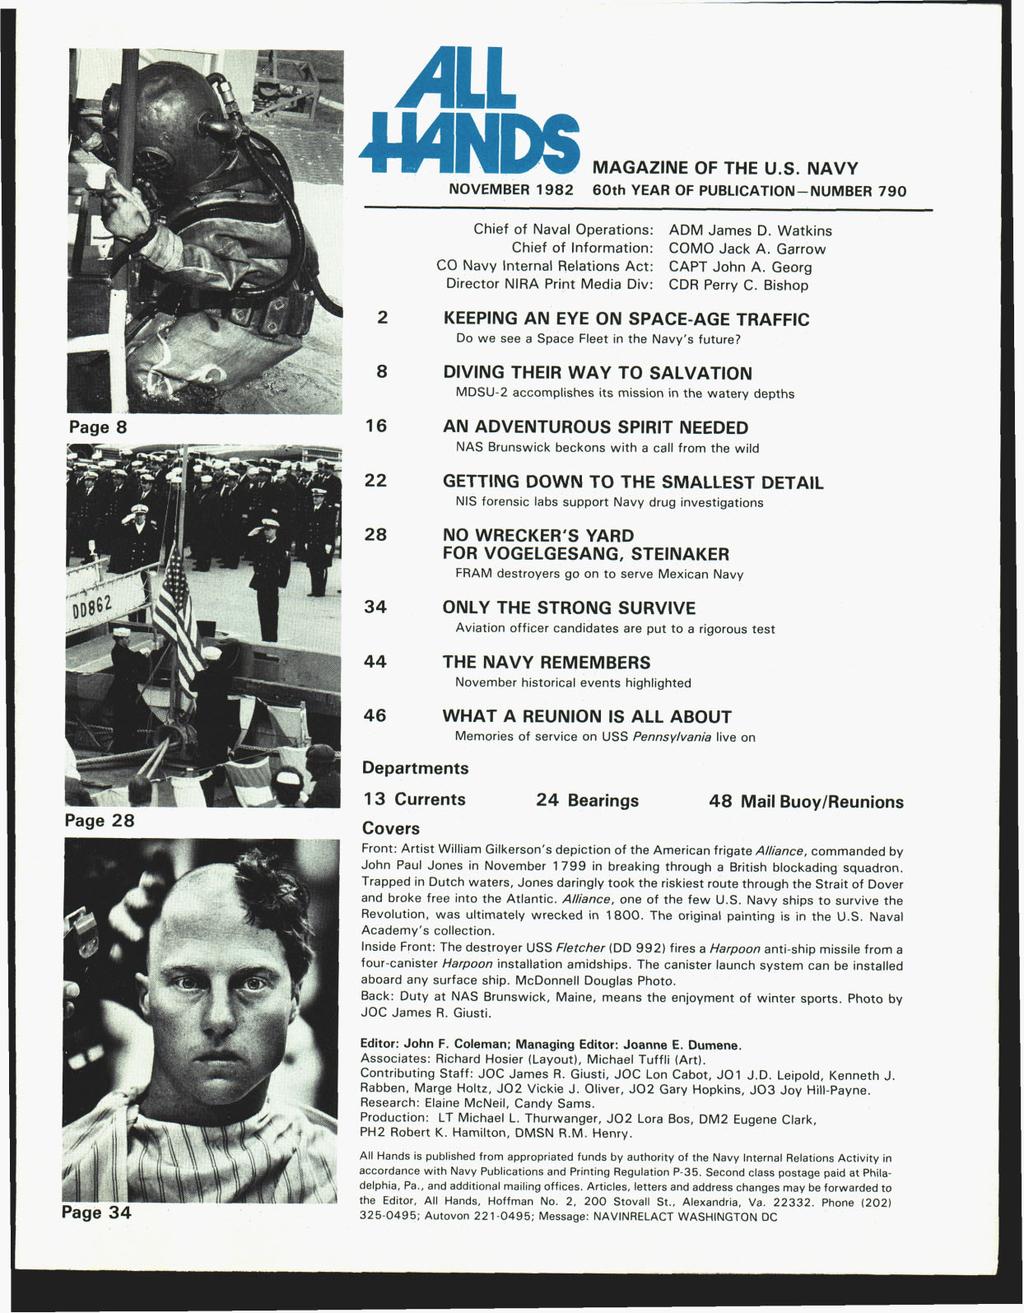 ALL WIND6 MAGAZINE OF THE U.S. NAVY NOVEMBER 1982 60th YEAR OF PUBLICATION-NUMBER 790 Chief of Naval Operations: ADM James D. Watkins Chief of Information: COMO Jack A.